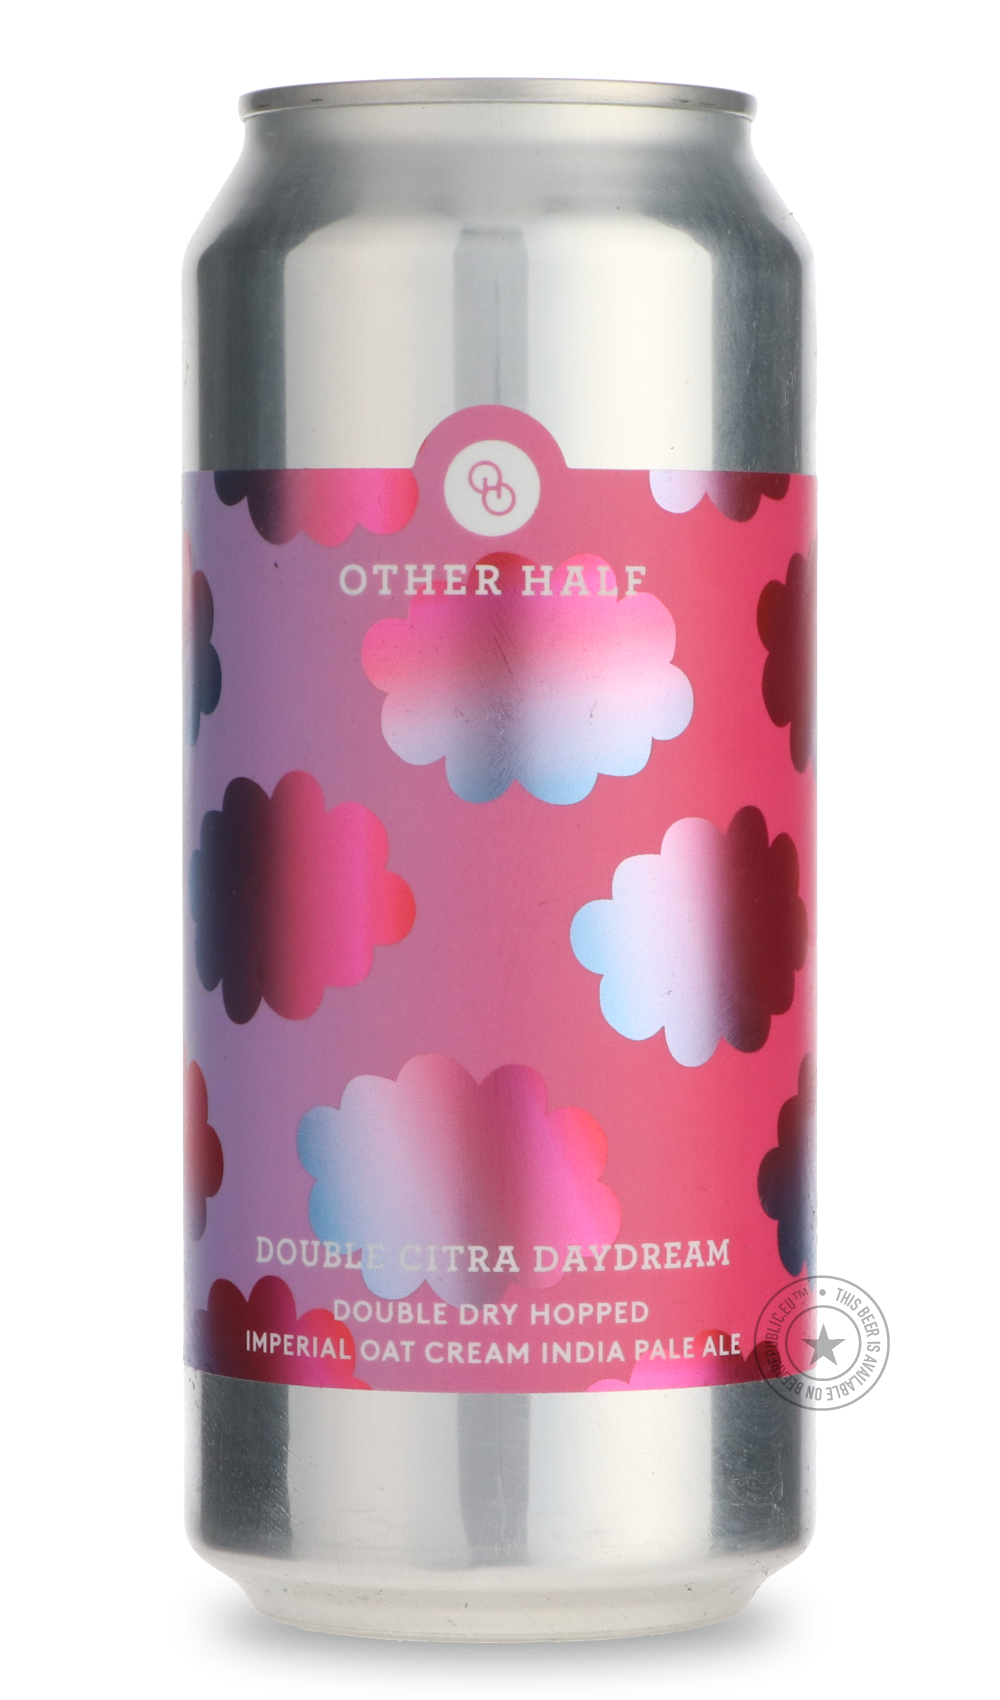 -Other Half- Double Citra Daydream-IPA- Only @ Beer Republic - The best online beer store for American & Canadian craft beer - Buy beer online from the USA and Canada - Bier online kopen - Amerikaans bier kopen - Craft beer store - Craft beer kopen - Amerikanisch bier kaufen - Bier online kaufen - Acheter biere online - IPA - Stout - Porter - New England IPA - Hazy IPA - Imperial Stout - Barrel Aged - Barrel Aged Imperial Stout - Brown - Dark beer - Blond - Blonde - Pilsner - Lager - Wheat - Weizen - Amber 